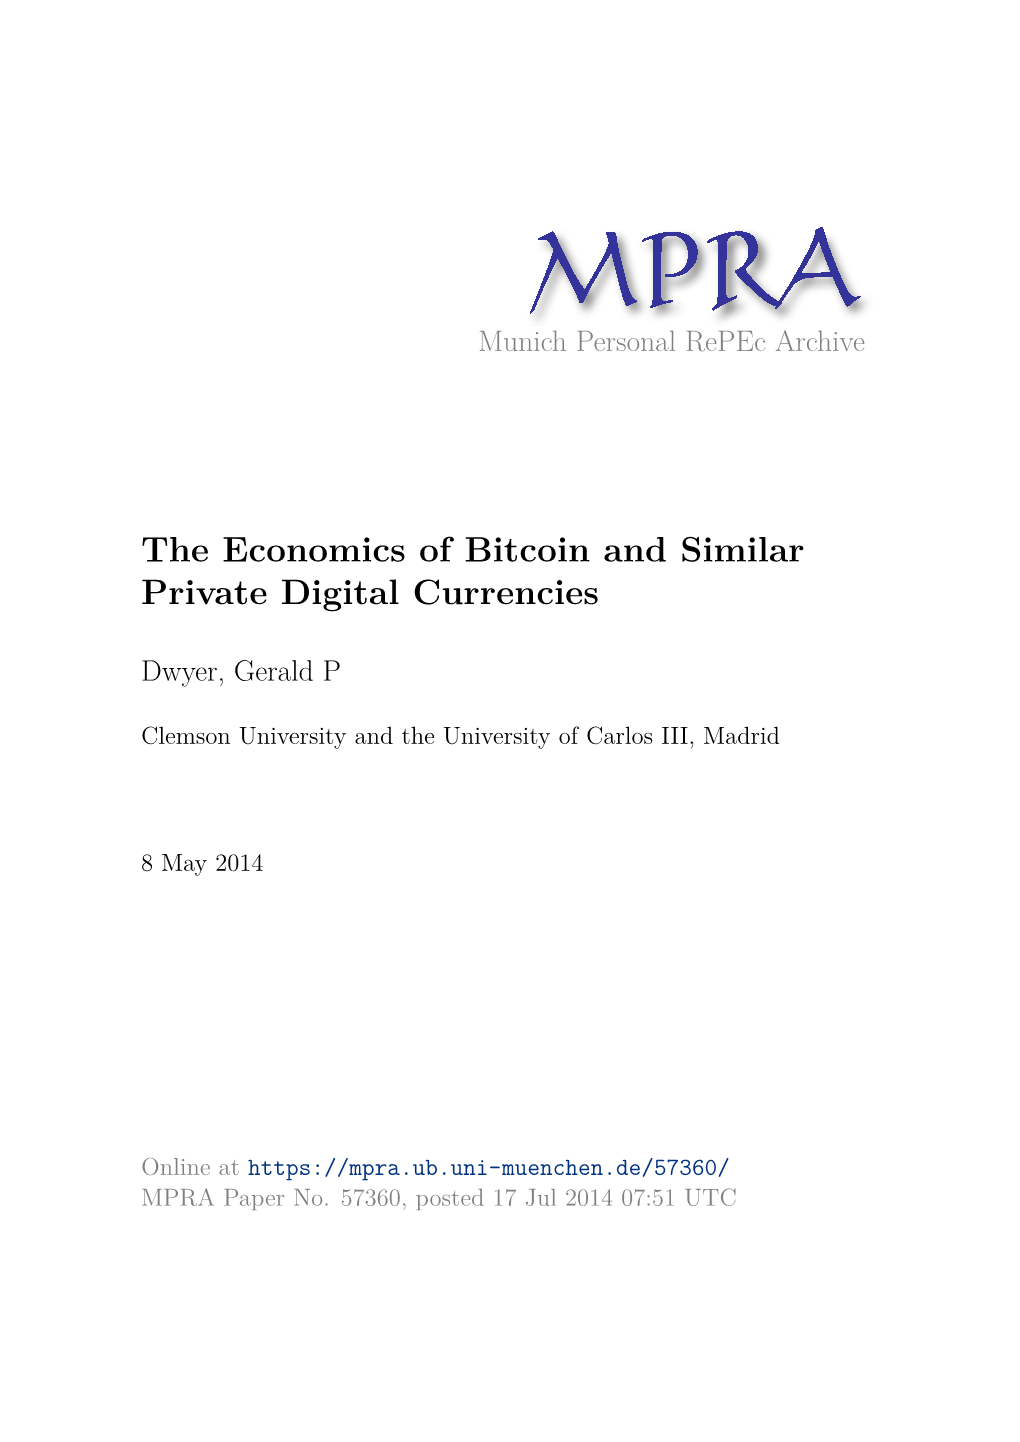 The Economics of Bitcoin and Similar Private Digital Currencies